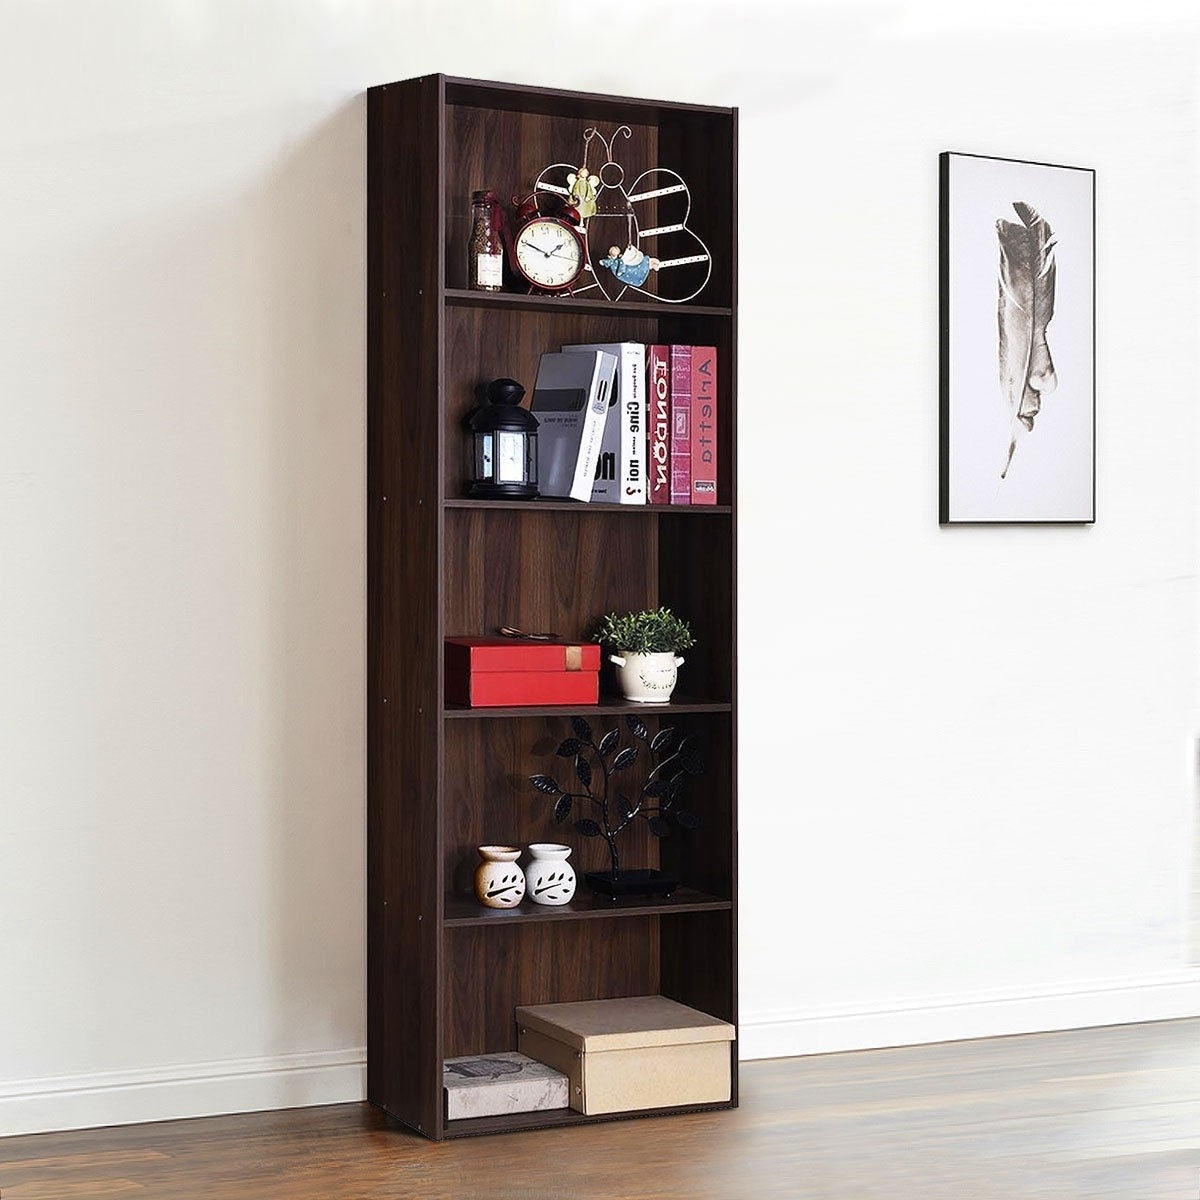 Living Room > Bookcases - Modern 5-Tier Bookcase Storage Shelf In Brown Walnut Wood Finish